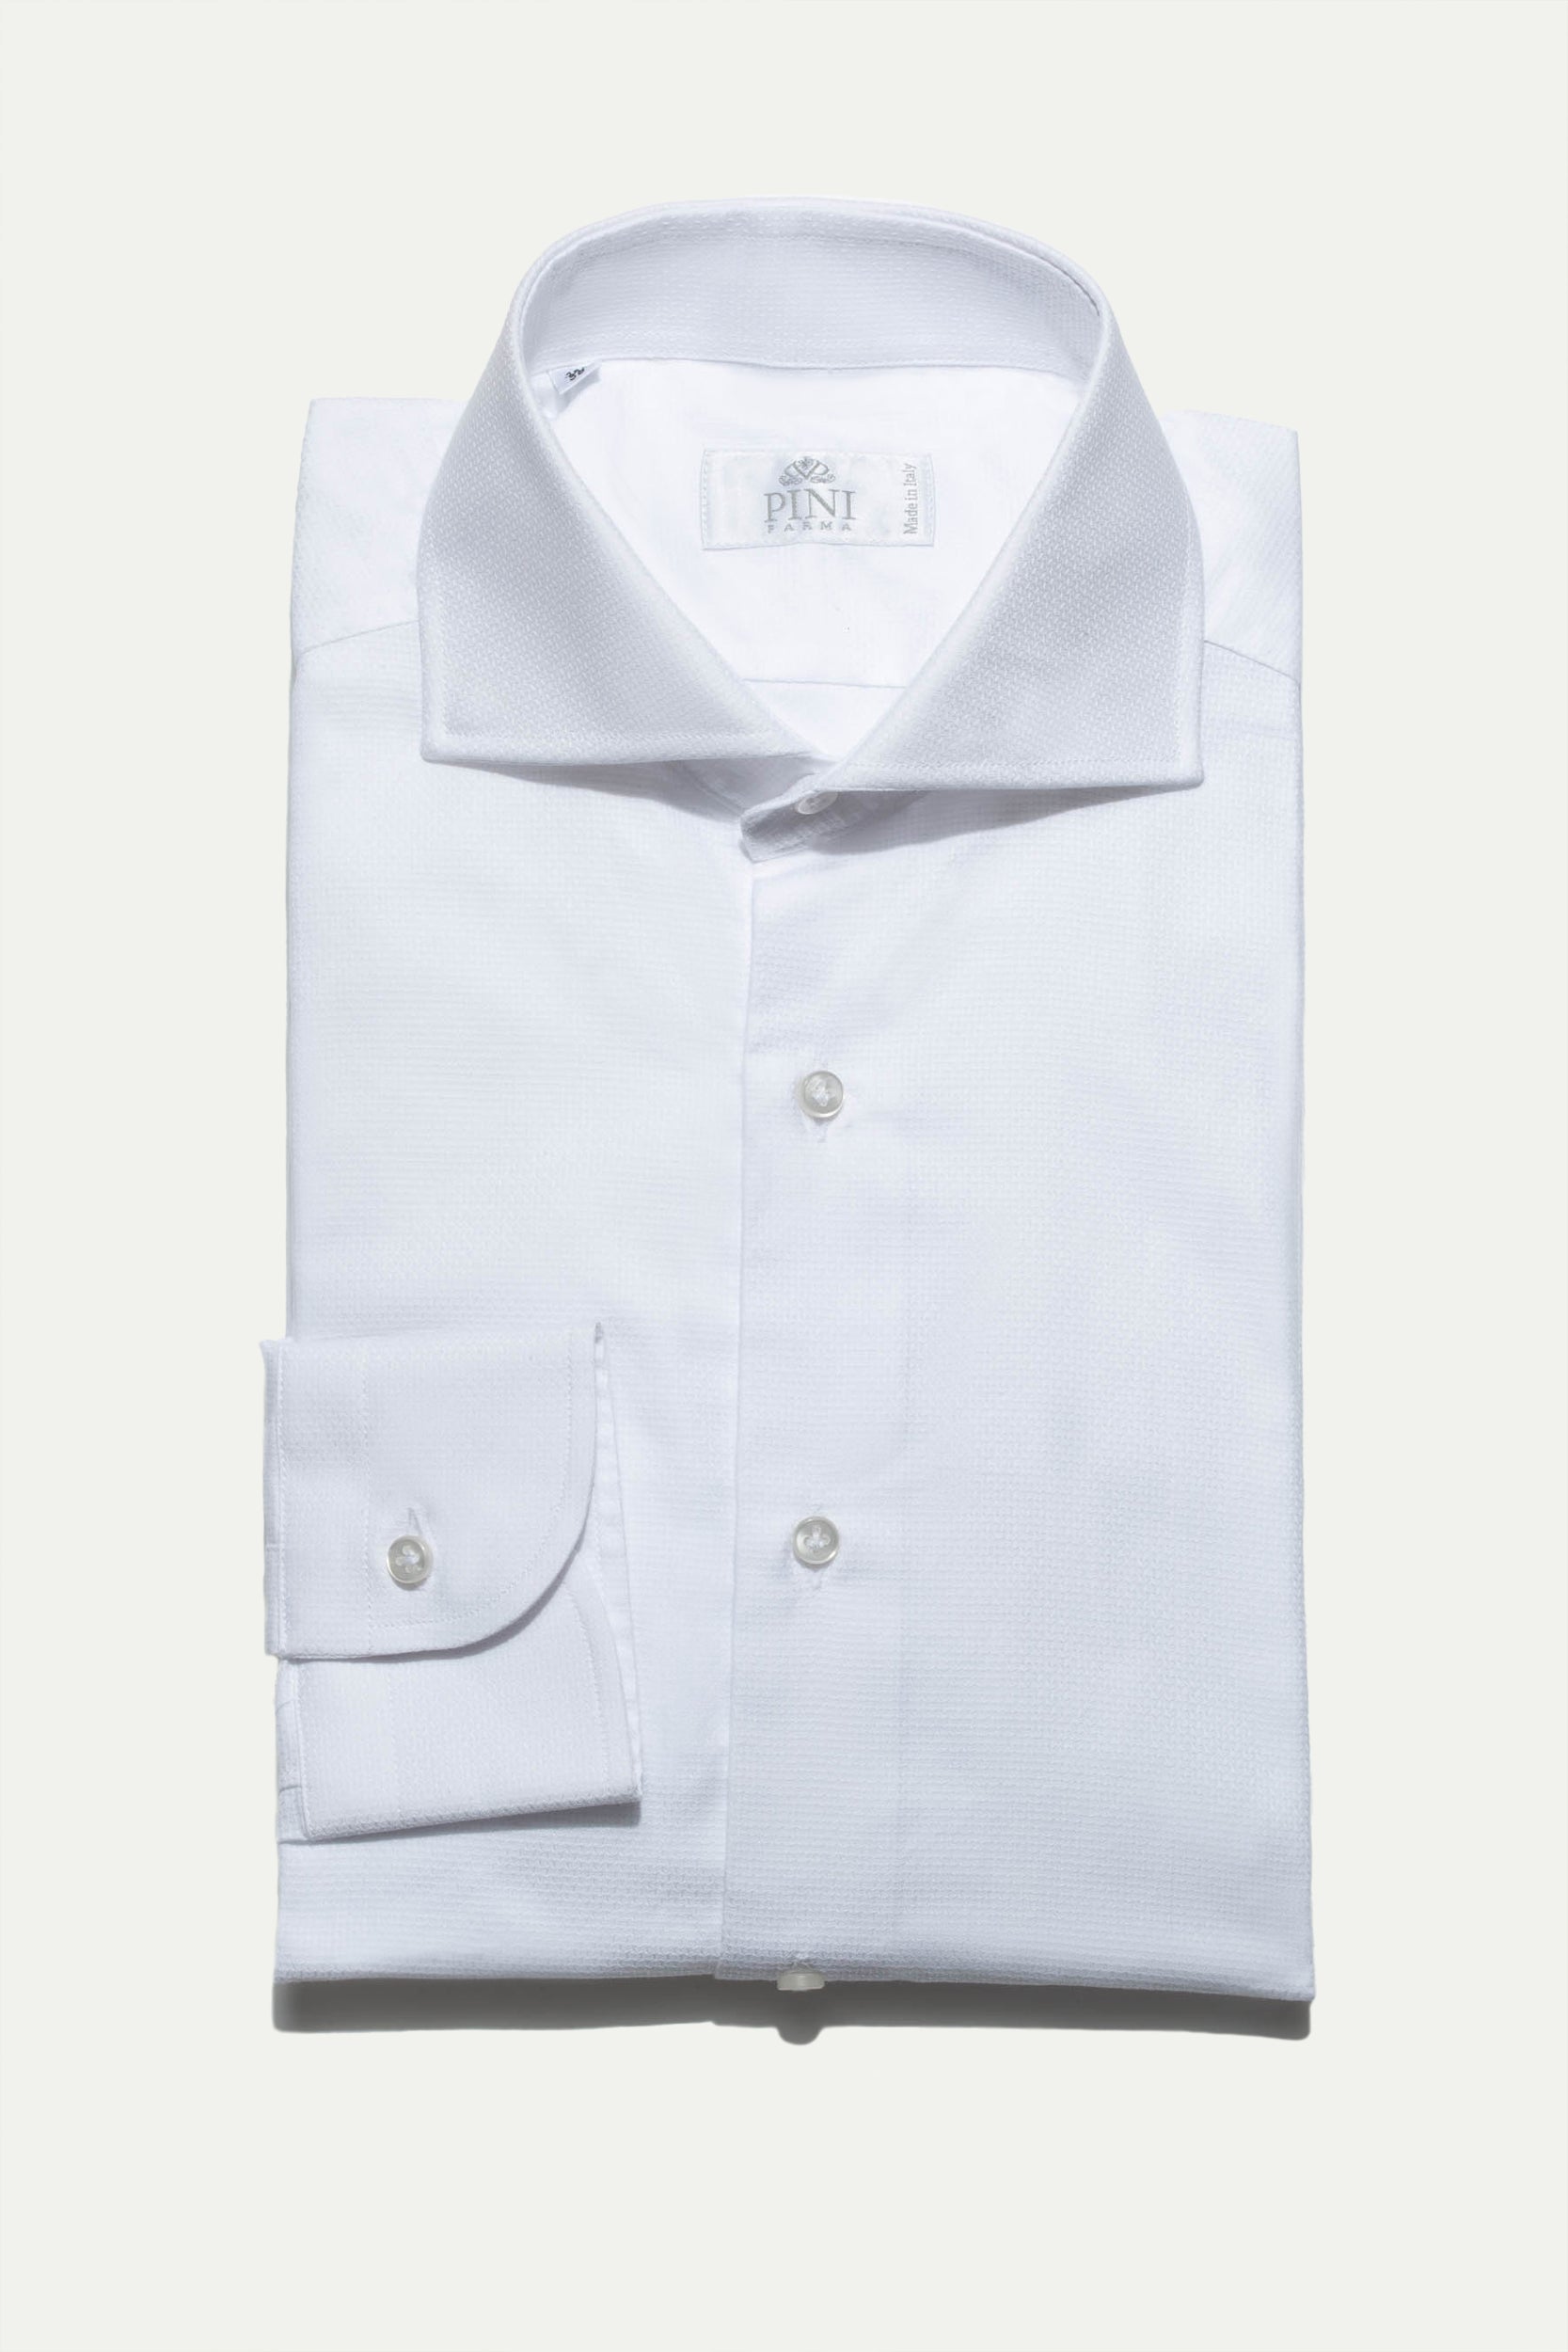 Chemise blanche texturée - Made In Italy